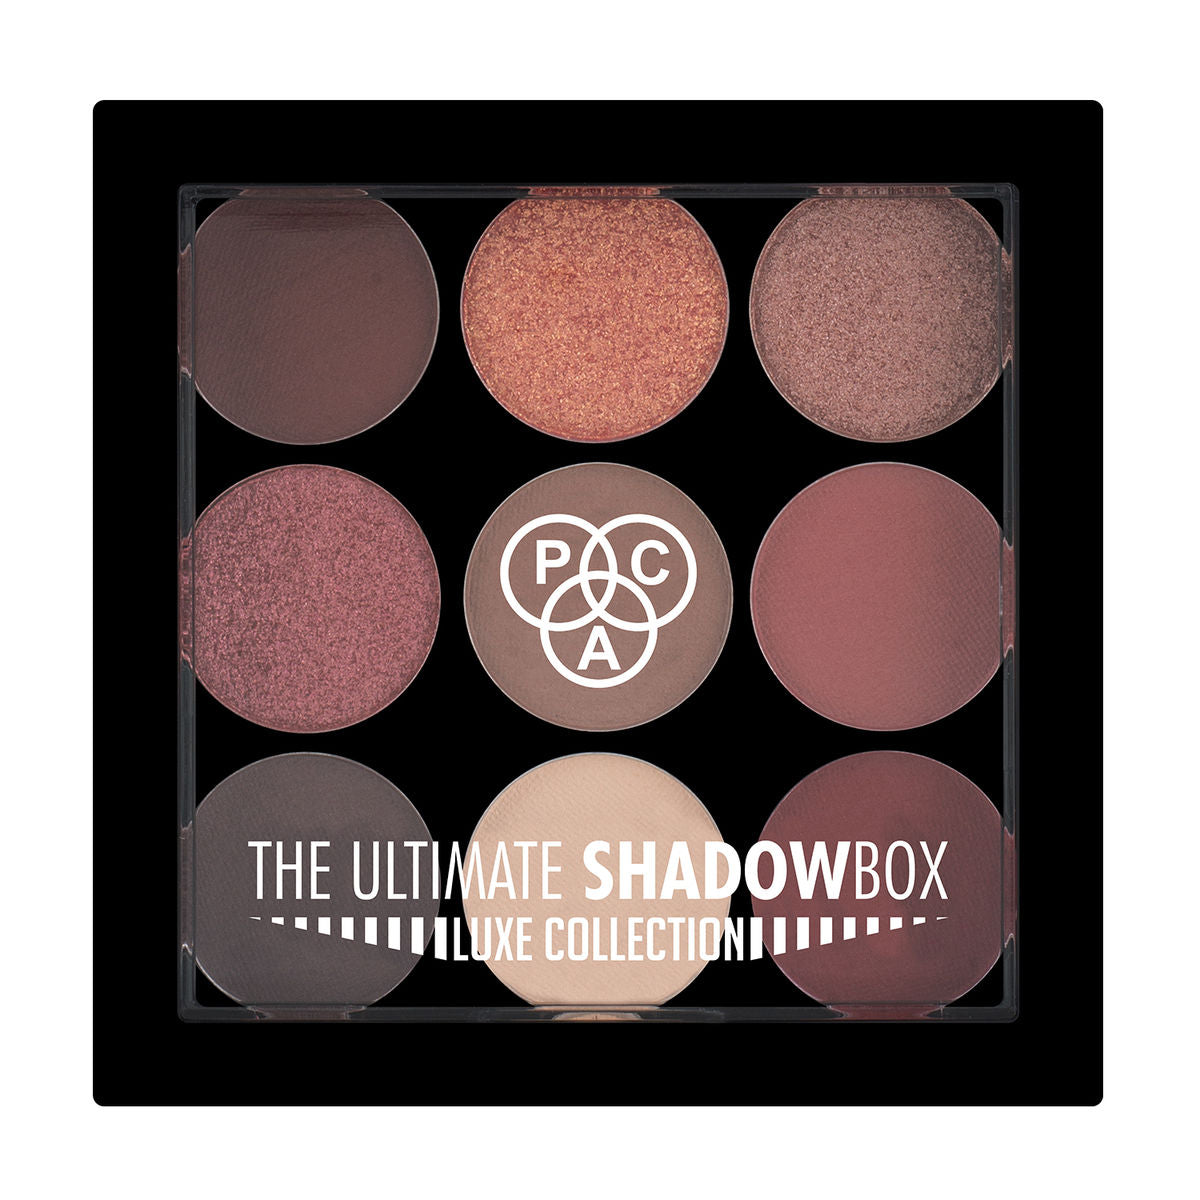 PAC Luxe Shadowbox X9 - Thinking Of You Mauve(1.4g)Each) PAC